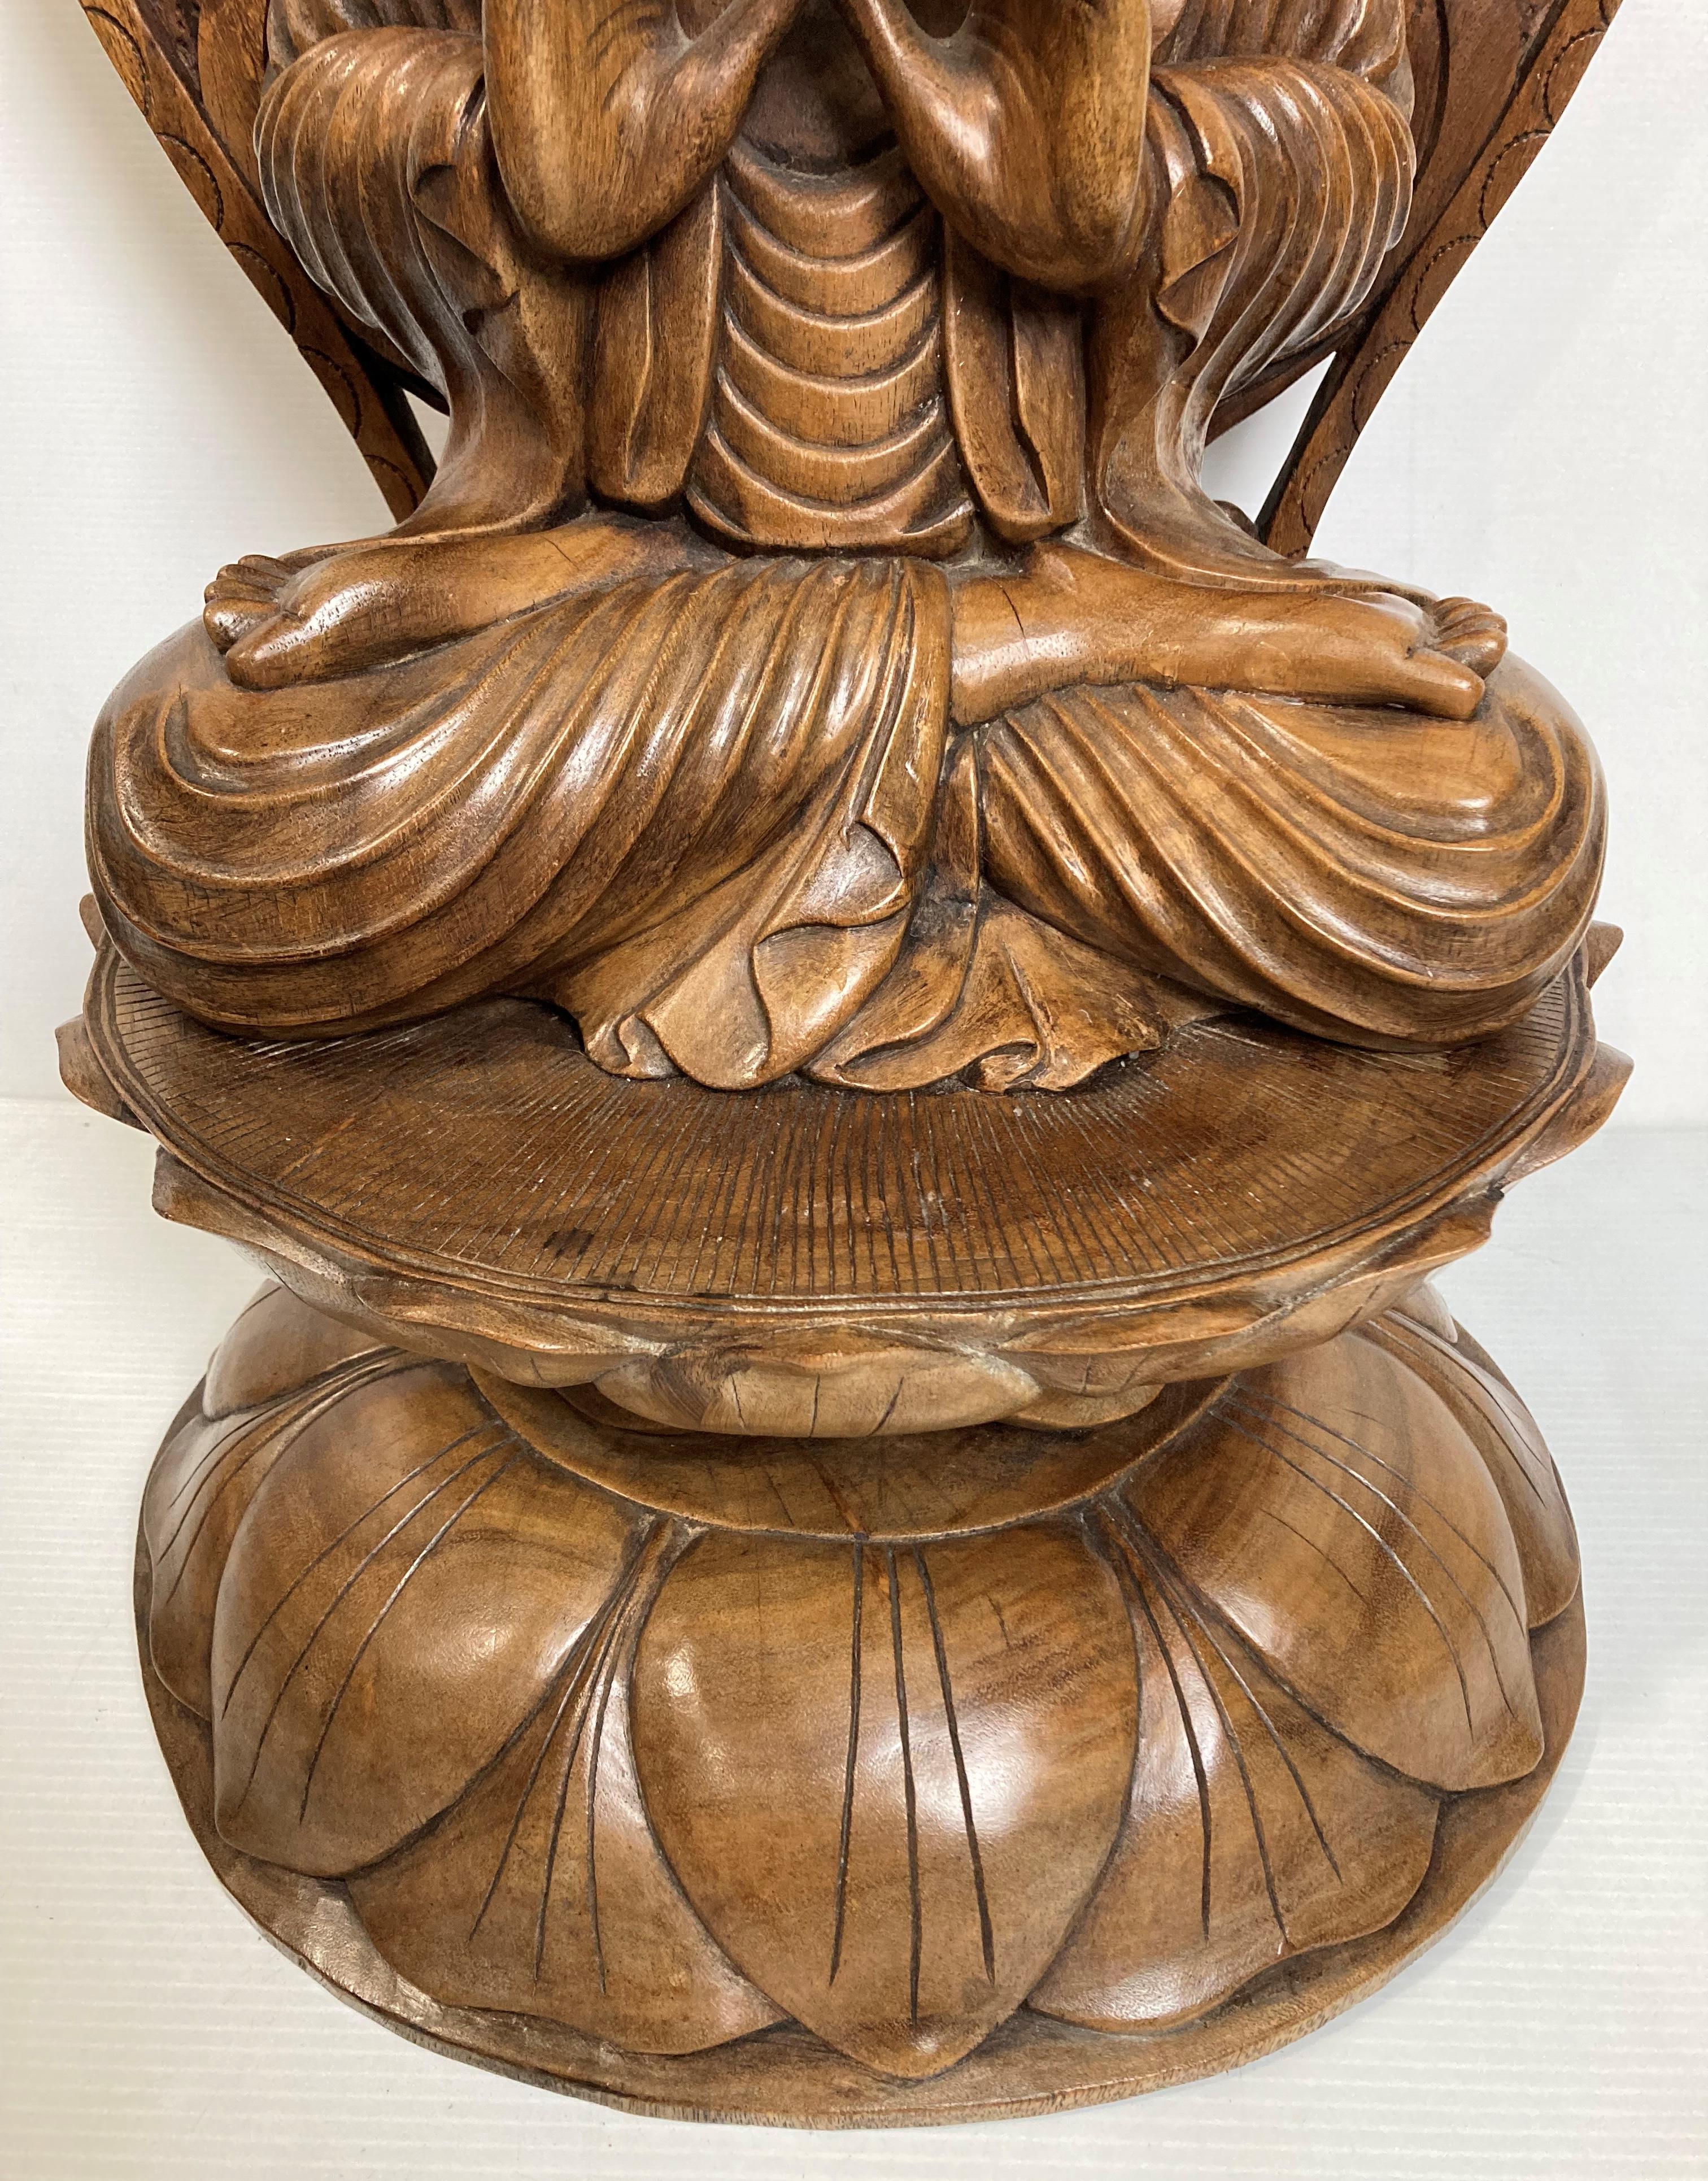 An Oriental wooden hand-carved meditating Buddha on lotus leaf - possibly Early 20th Century - 70cm - Image 3 of 5